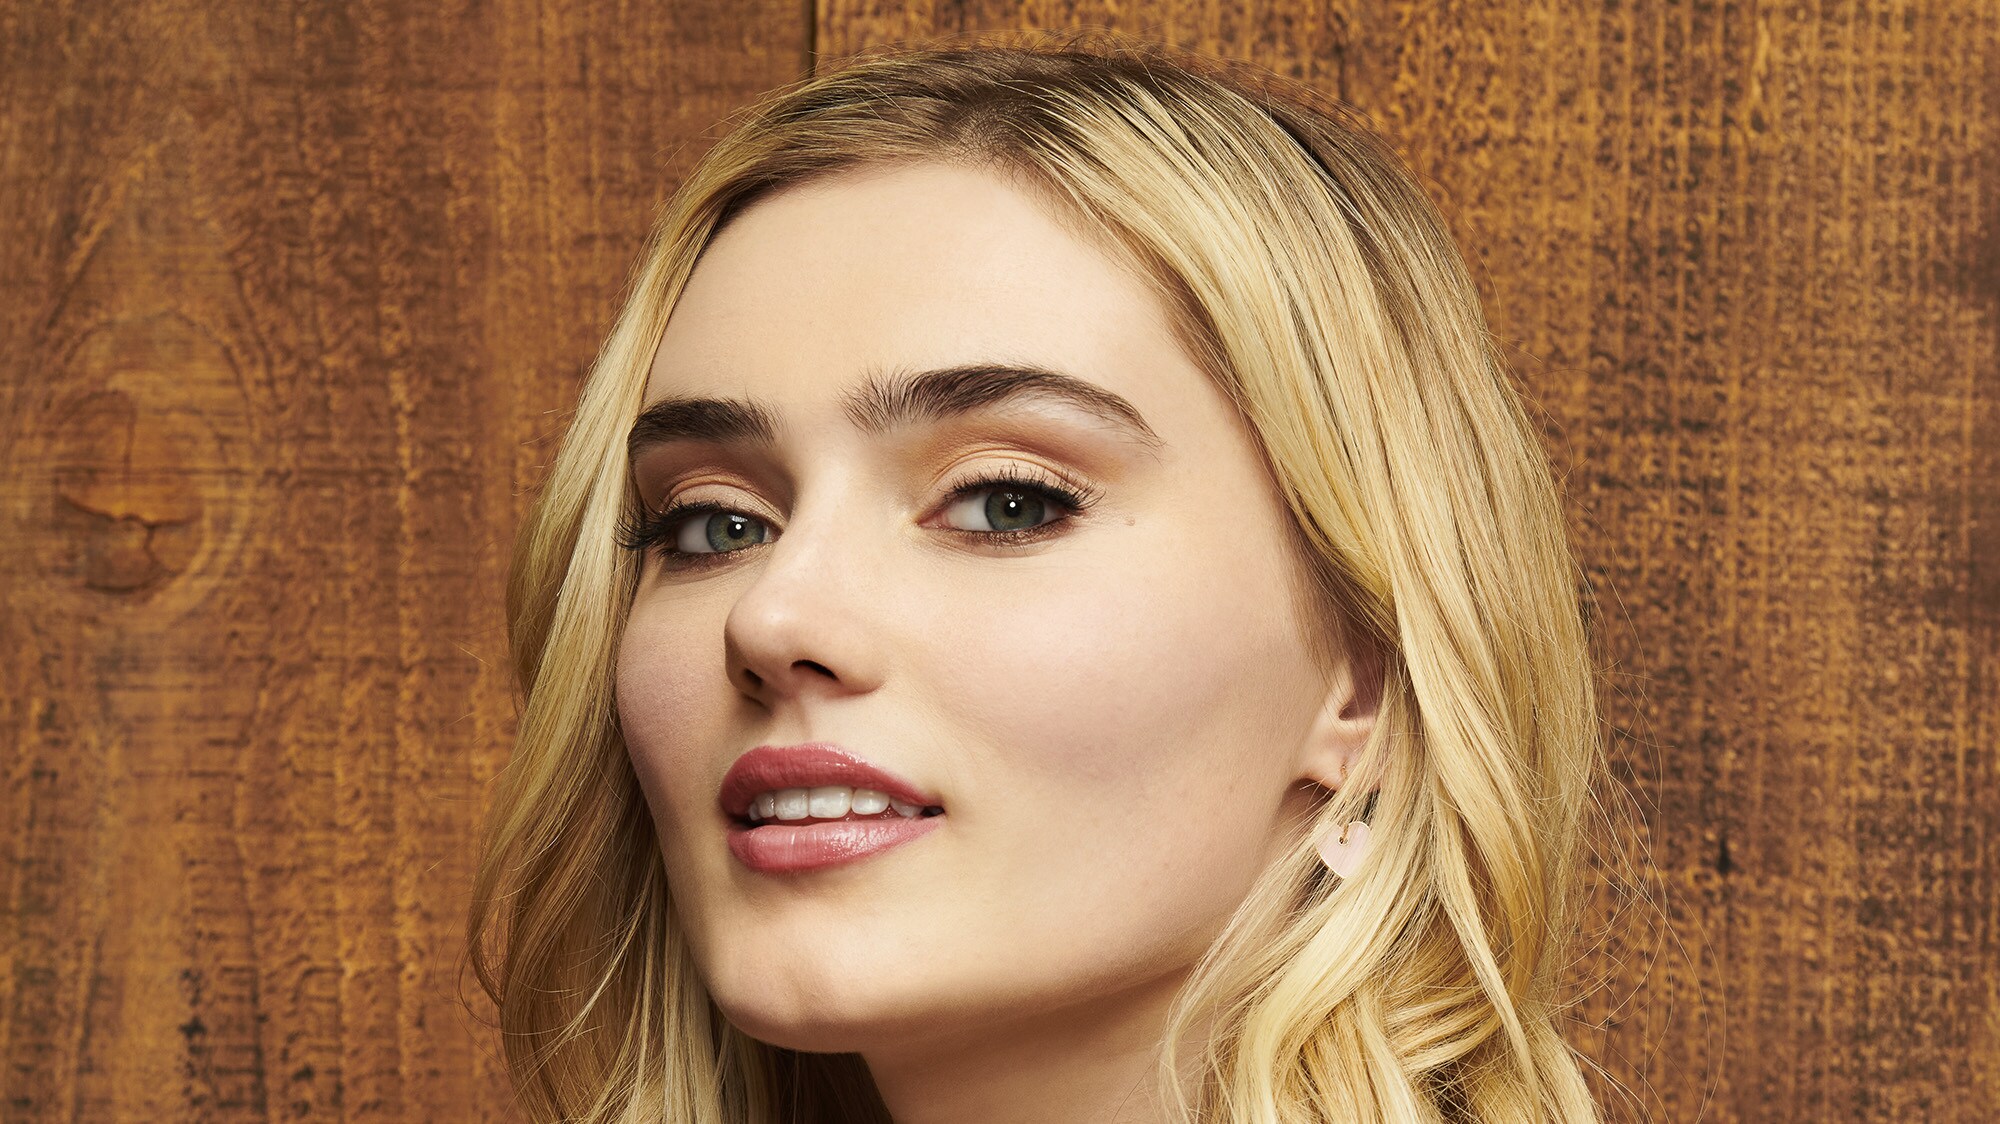 HIGH SCHOOL MUSICAL: THE MUSICAL: THE SERIES - Disney’s "High School Musical: The Musical: The Series" stars Meg Donnelly as Val. (Disney/Sheryl Nields)